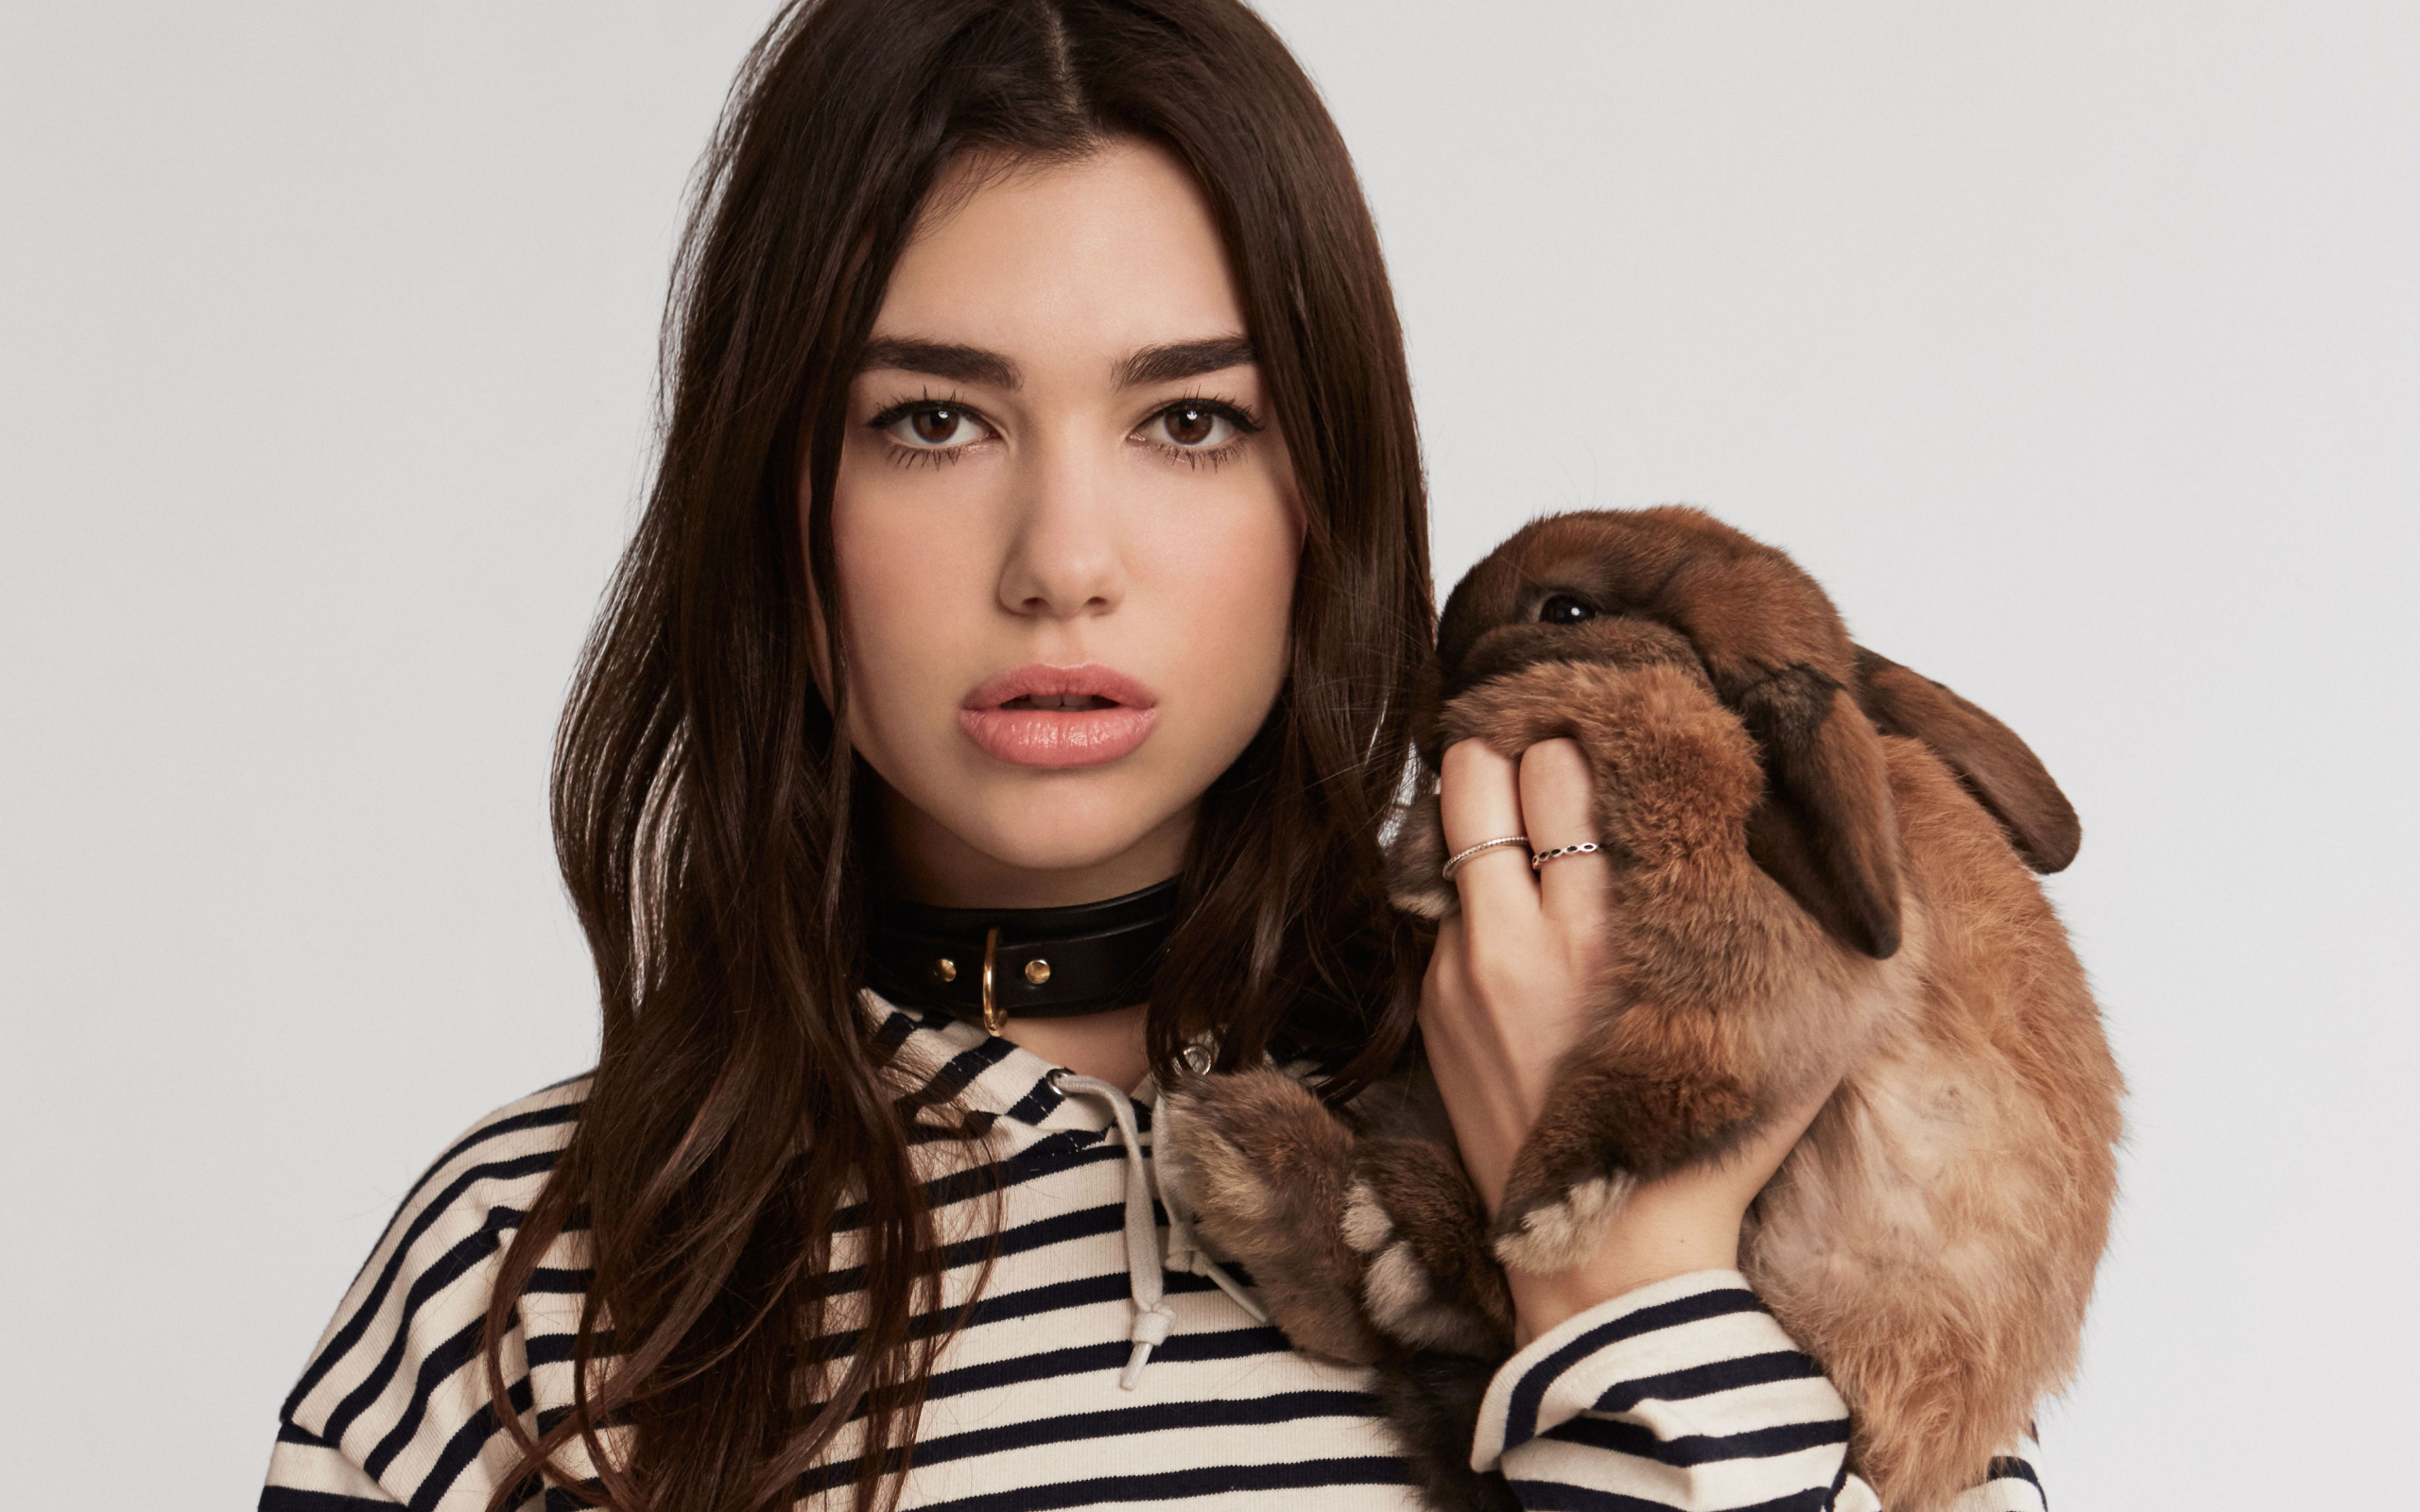 Singer Dua Lipa with a decorative rabbit in her hands